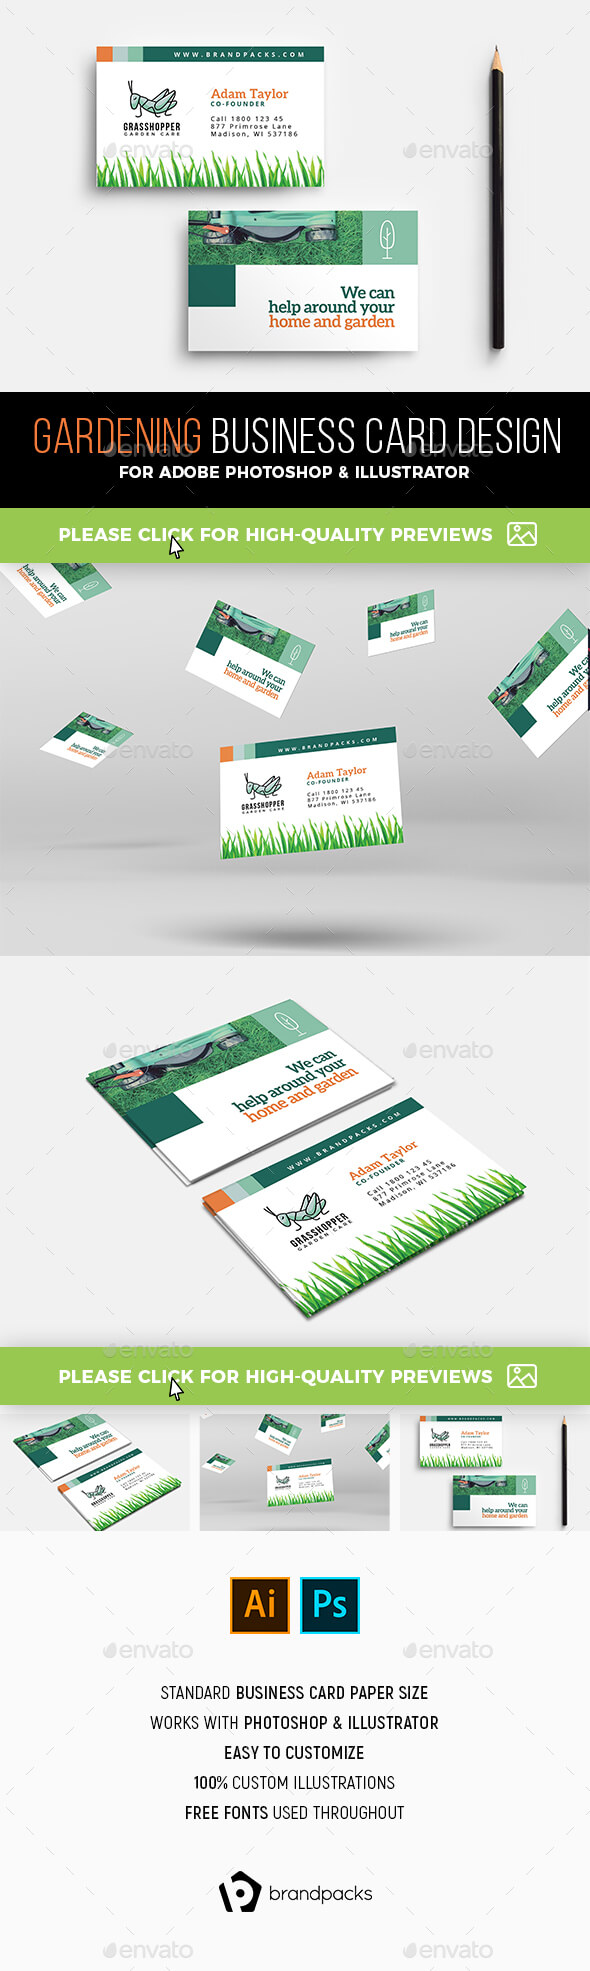 Gardening Business Card Templates & Designs From Graphicriver Intended For Gardening Business Cards Templates